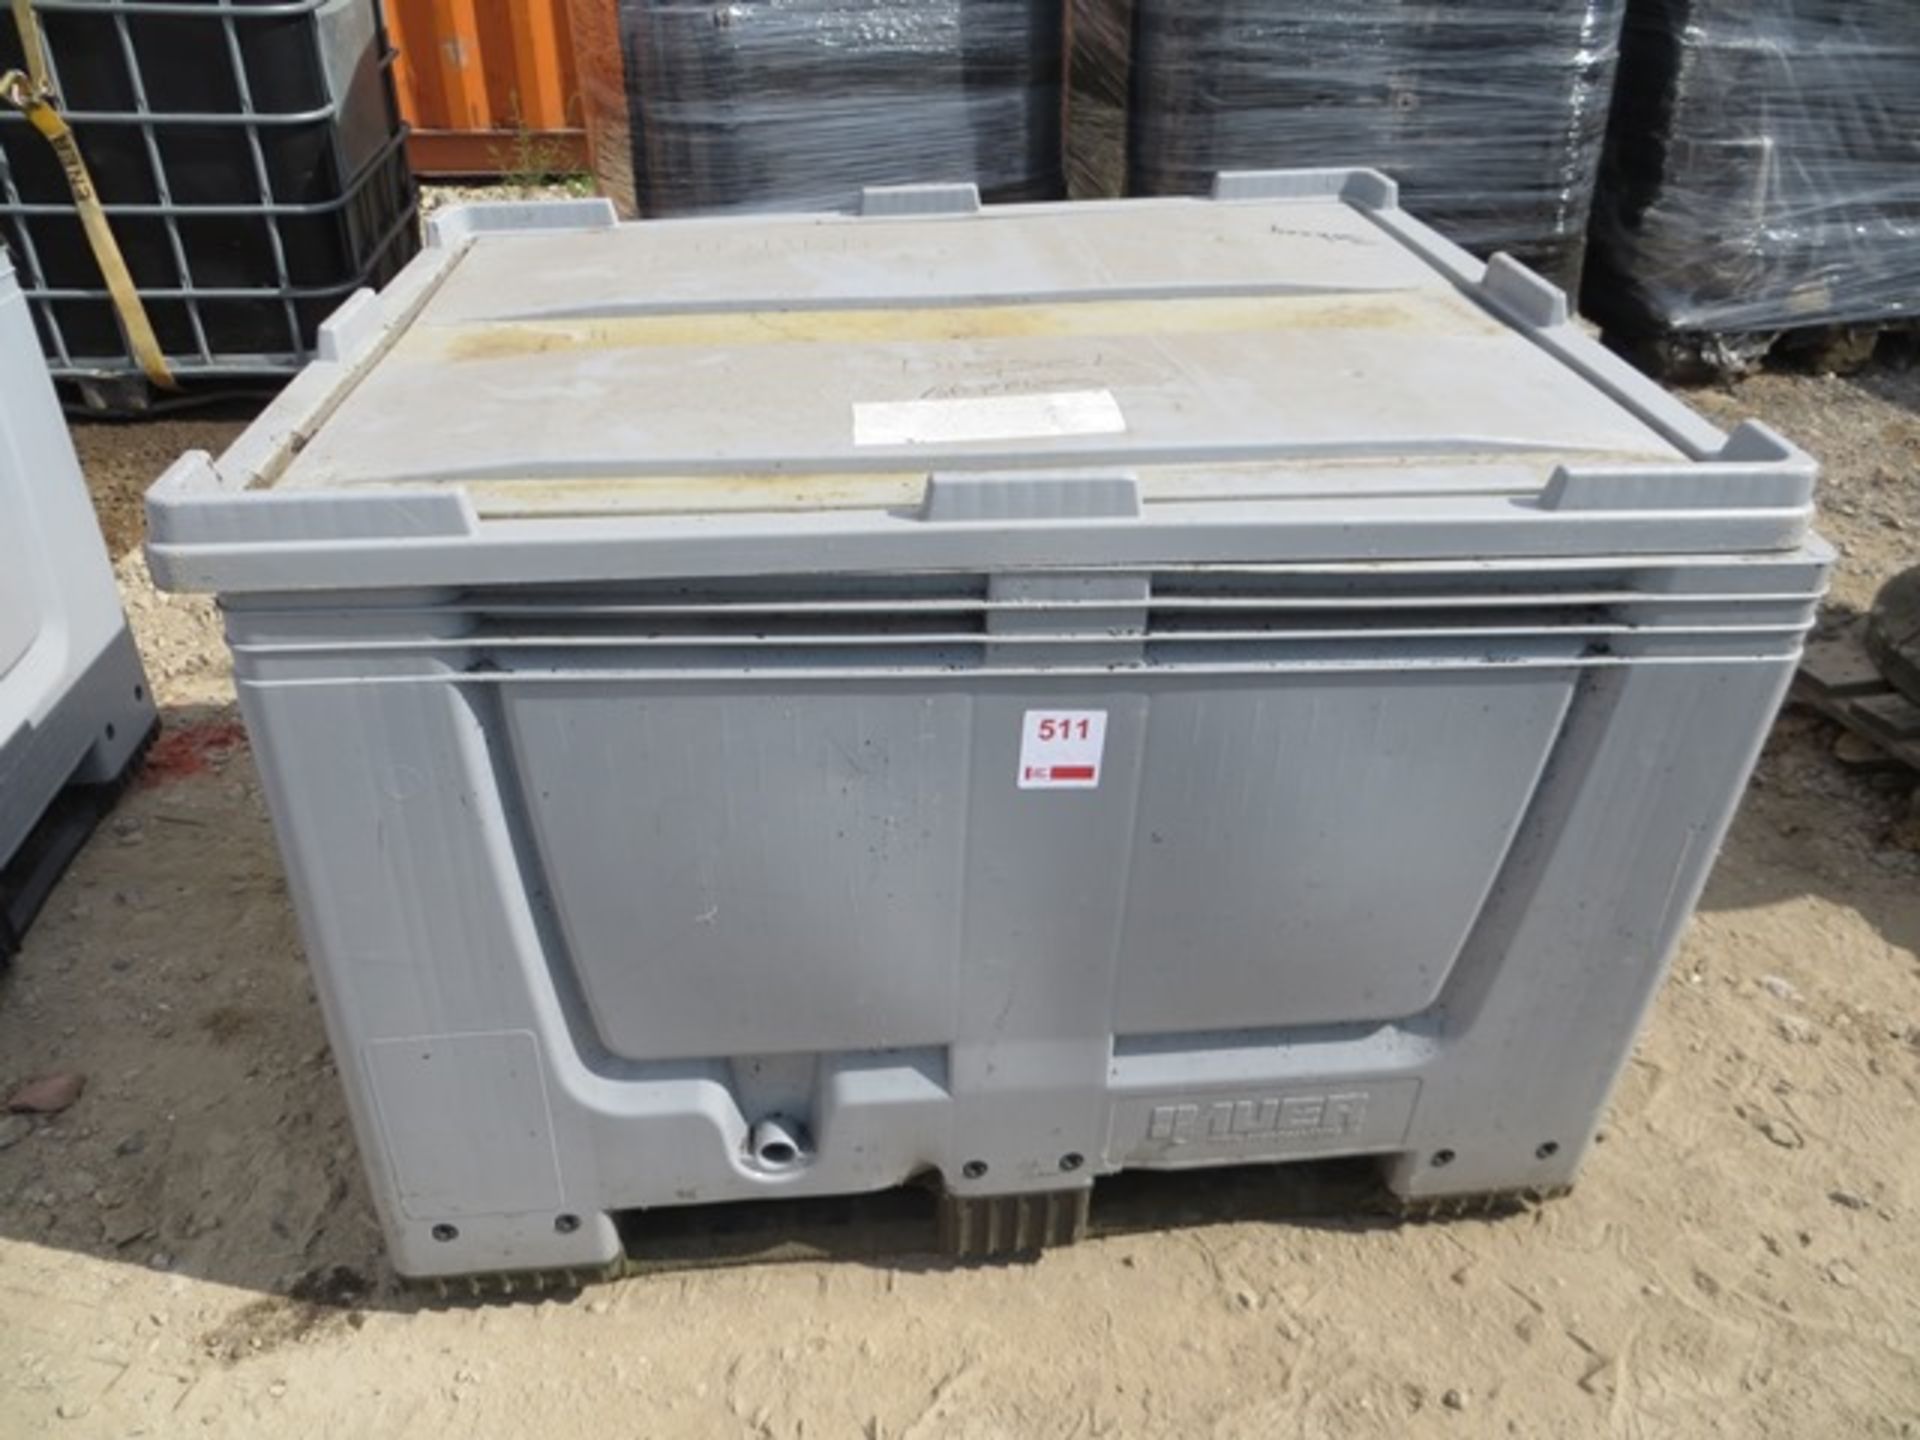 Stackable Fishbox storage container approx. 1200mm (L) x 800mm (W) x 800mm (H) c/w 11 empty Jerry - Image 3 of 3